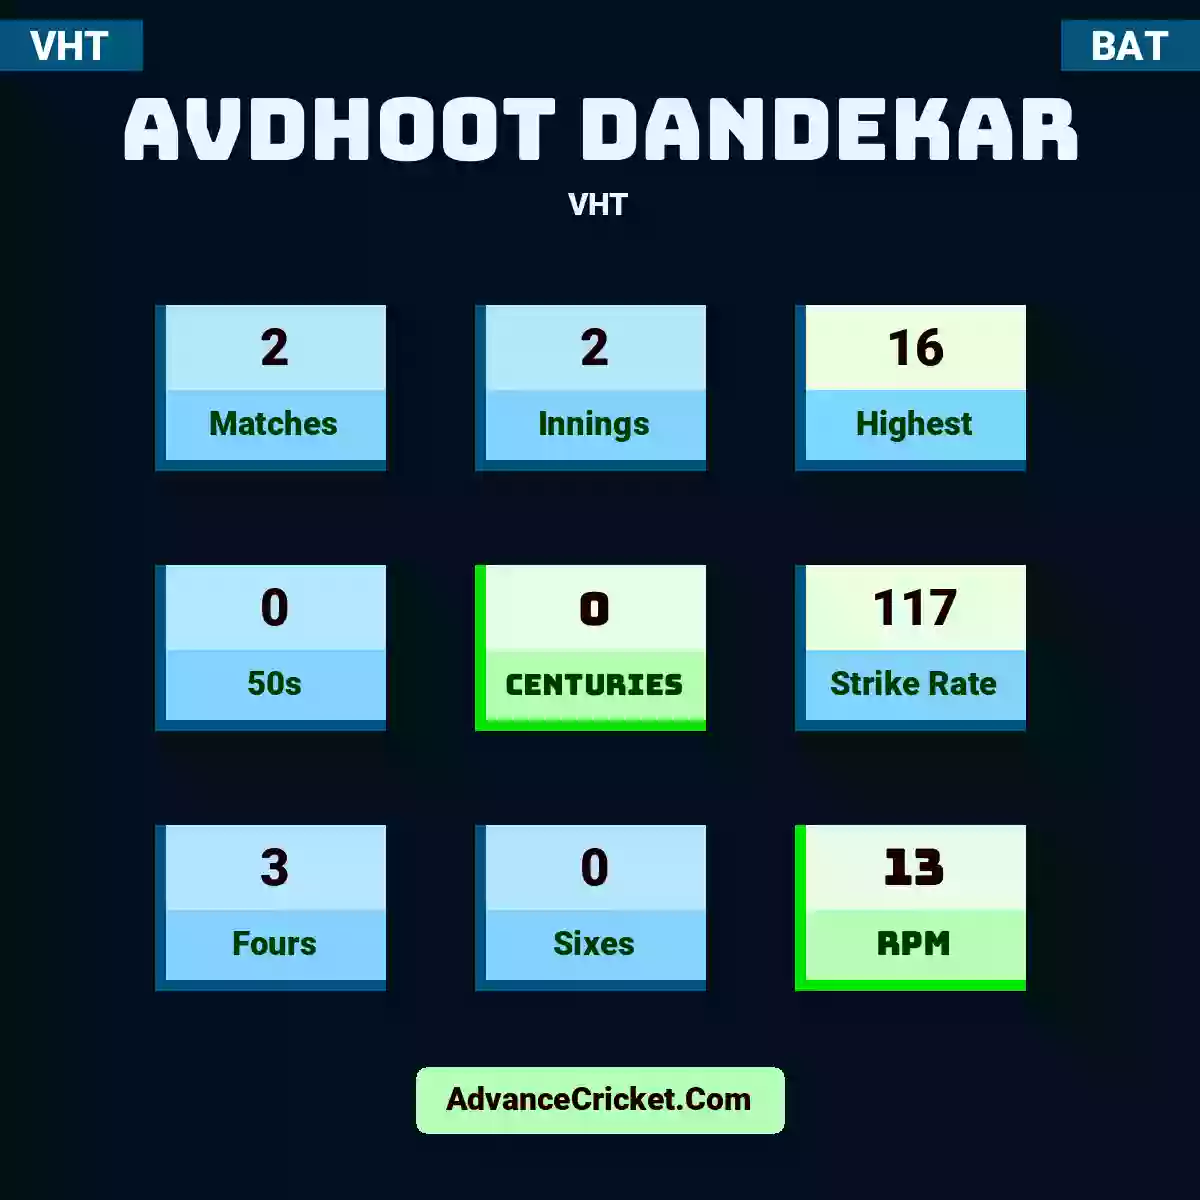 Avdhoot Dandekar VHT , Avdhoot Dandekar played 2 matches, scored 16 runs as highest, 0 half-centuries, and 0 centuries, with a strike rate of 117. A.Dandekar hit 3 fours and 0 sixes, with an RPM of 13.